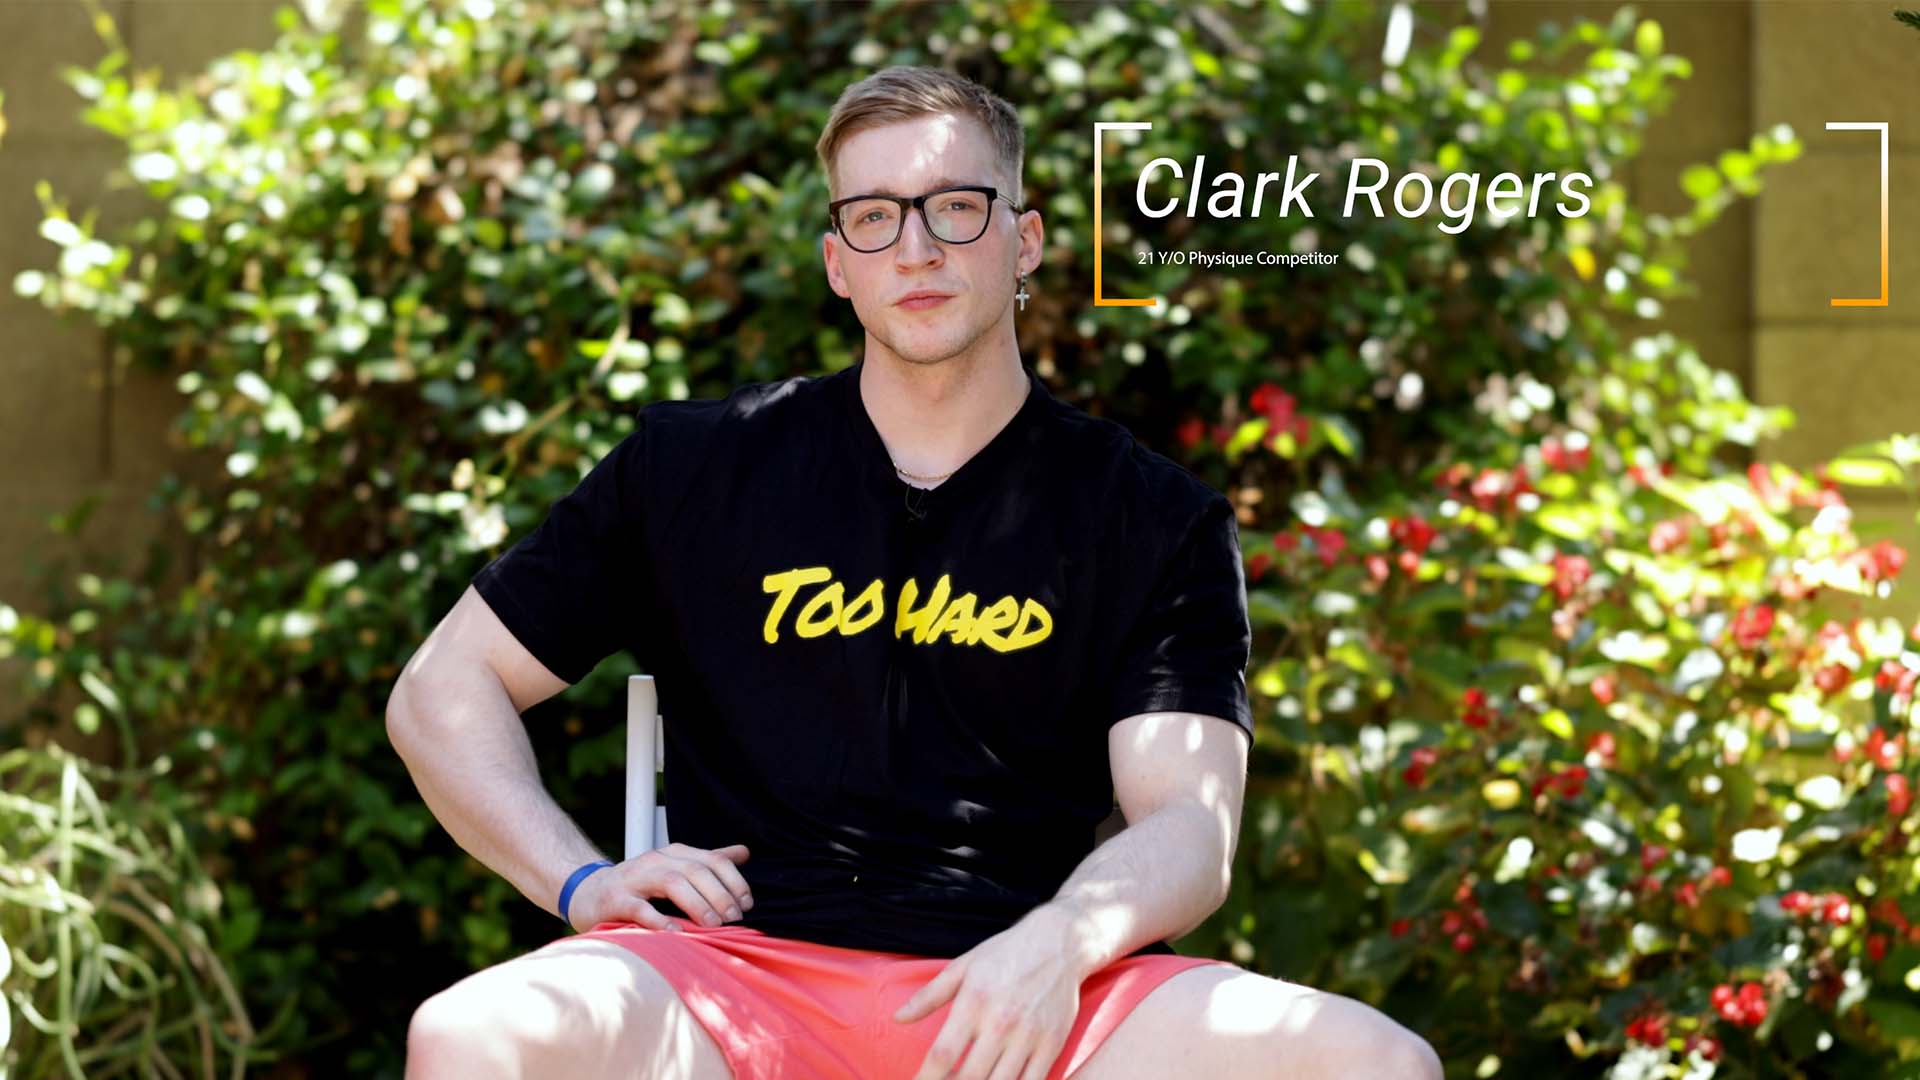 There's A New Guy On Set And His Name Is Clark Rogers, Baby!